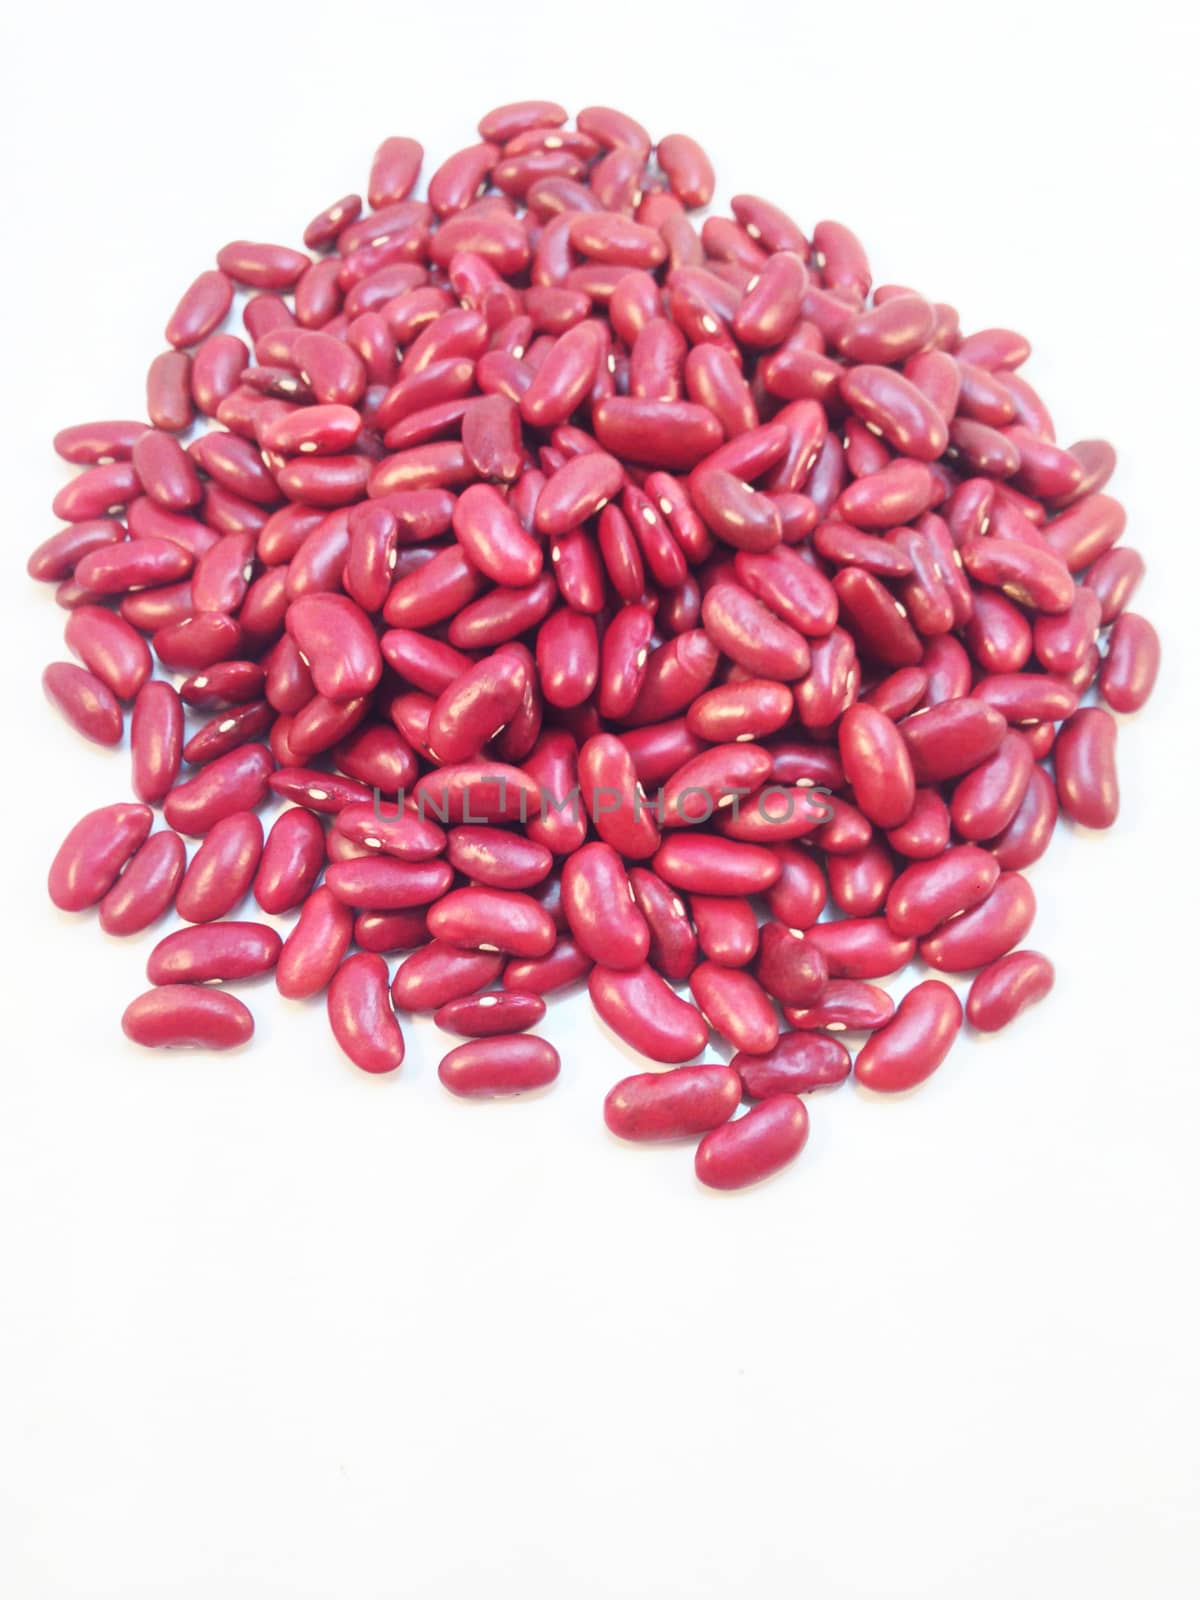 Red Bean on white background